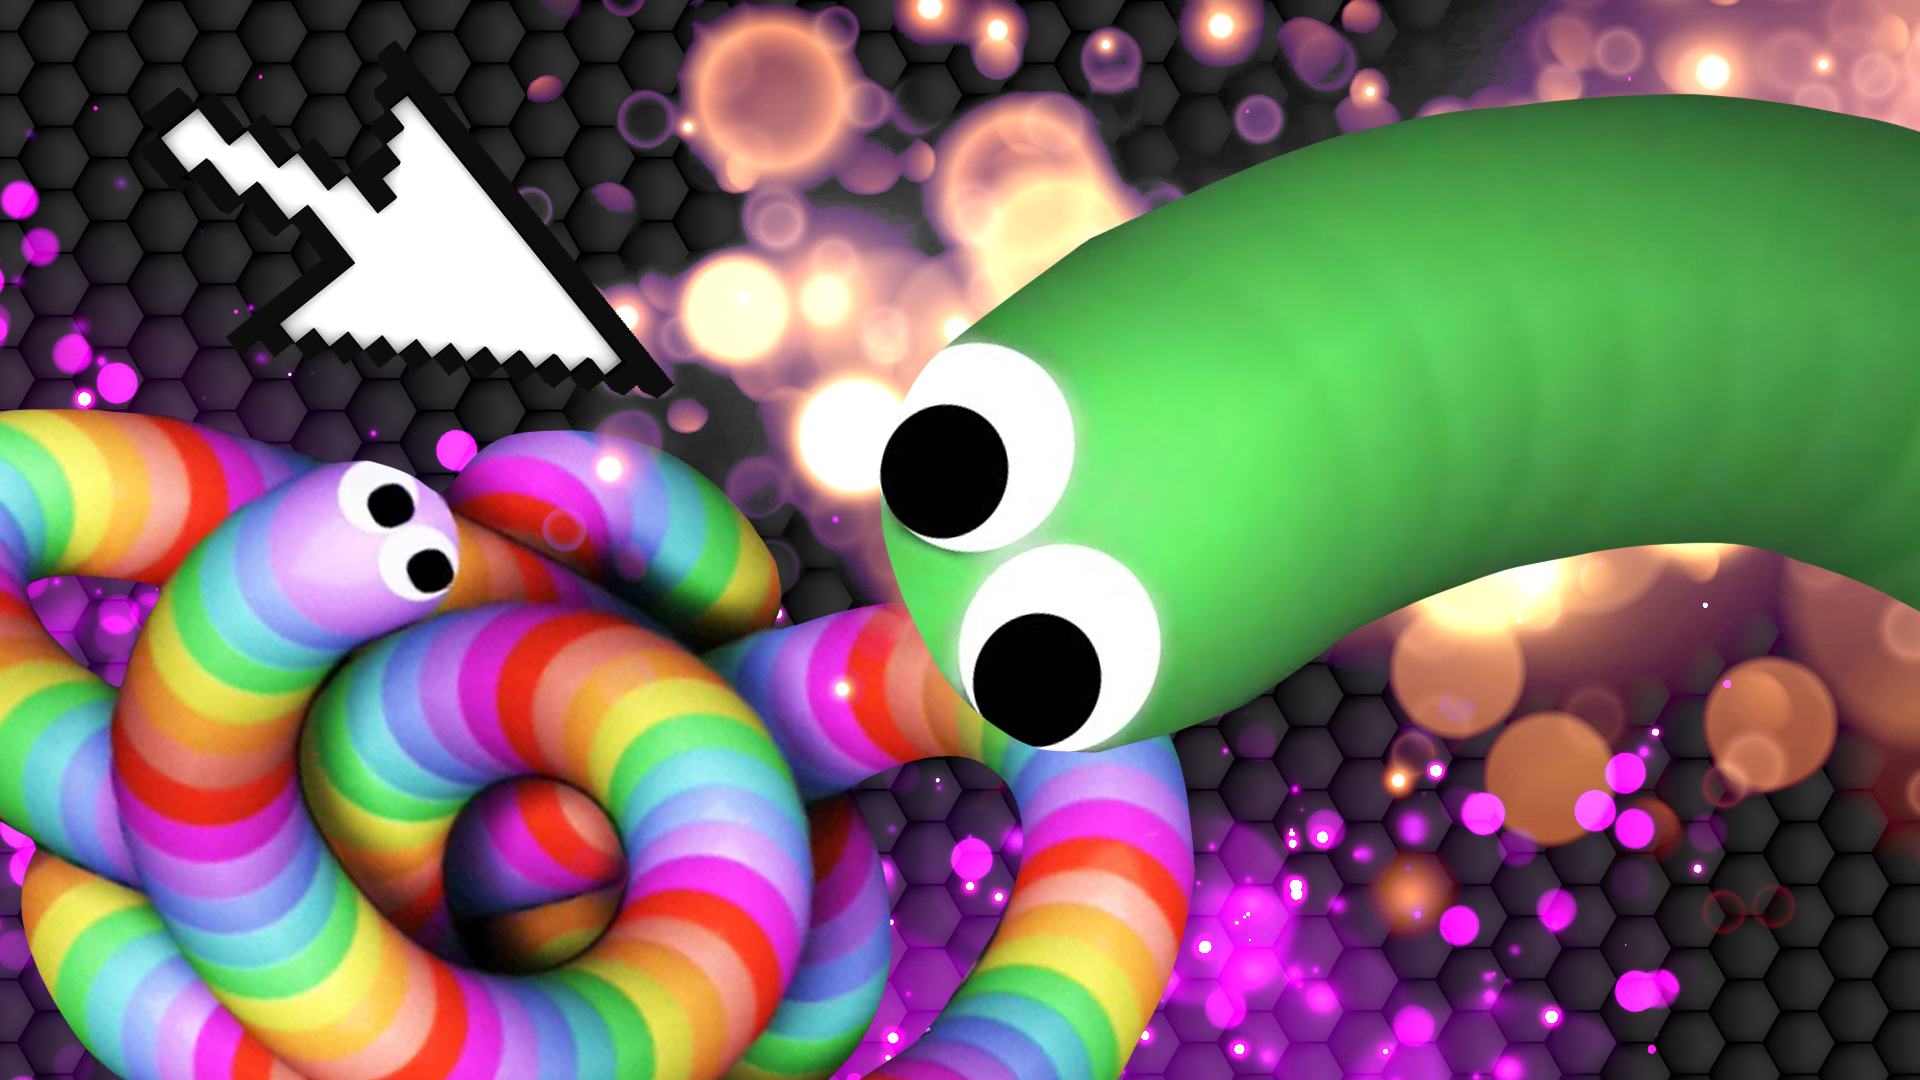 awesome Slither.io Greatest Tips and Suggestions Slither.io Live Stream  (Comparable Recreation to Agar.io) Check more at …